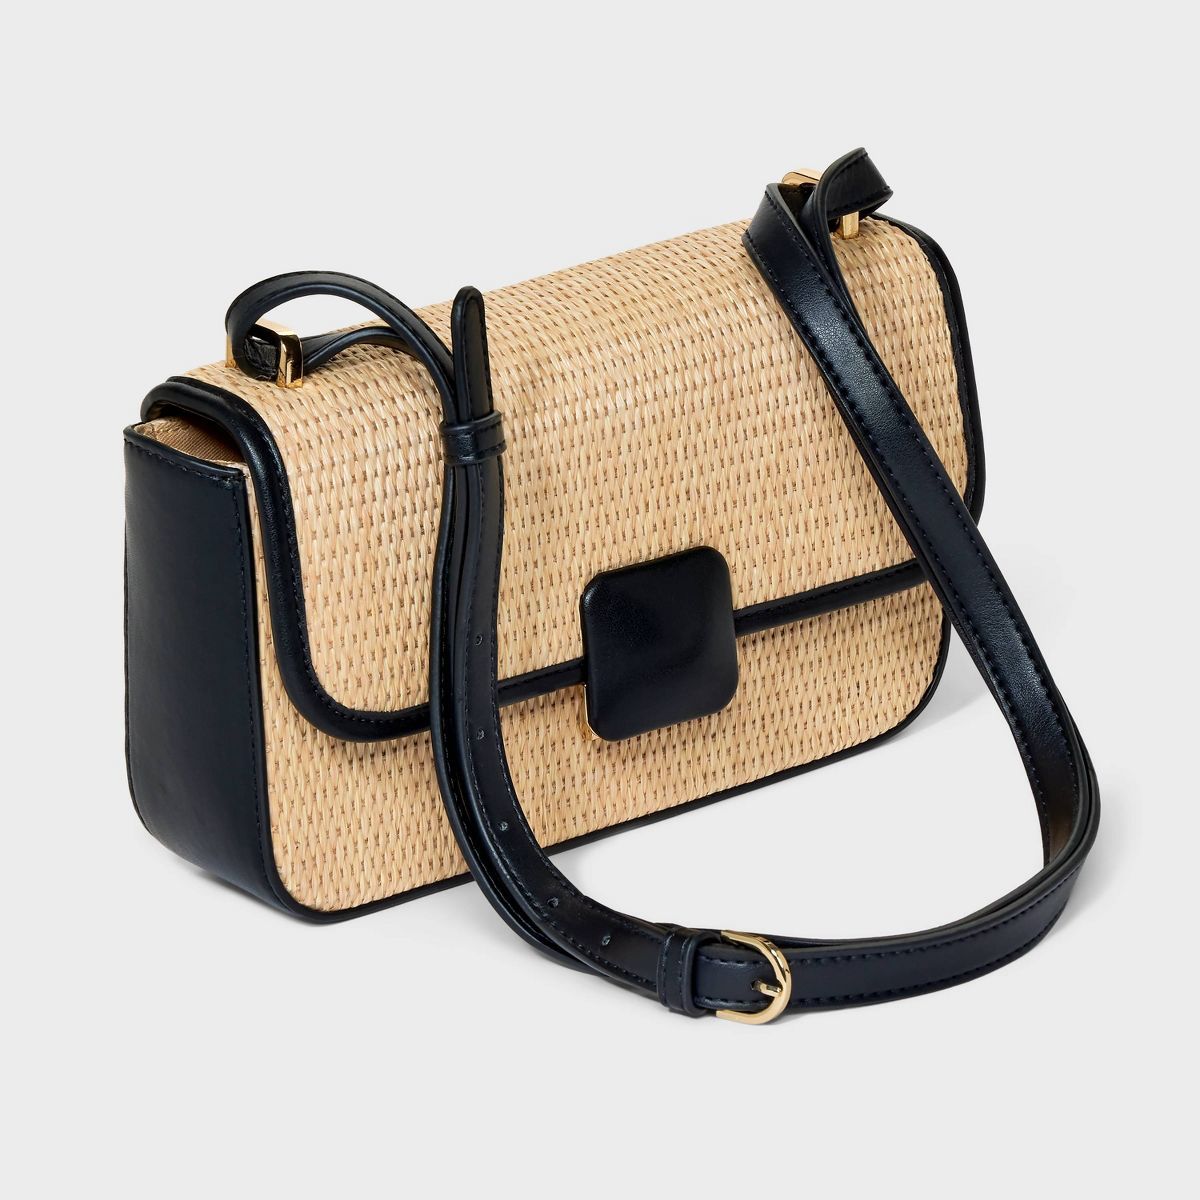 Elongated Refined Crossbody Bag - A New Day™ | Target